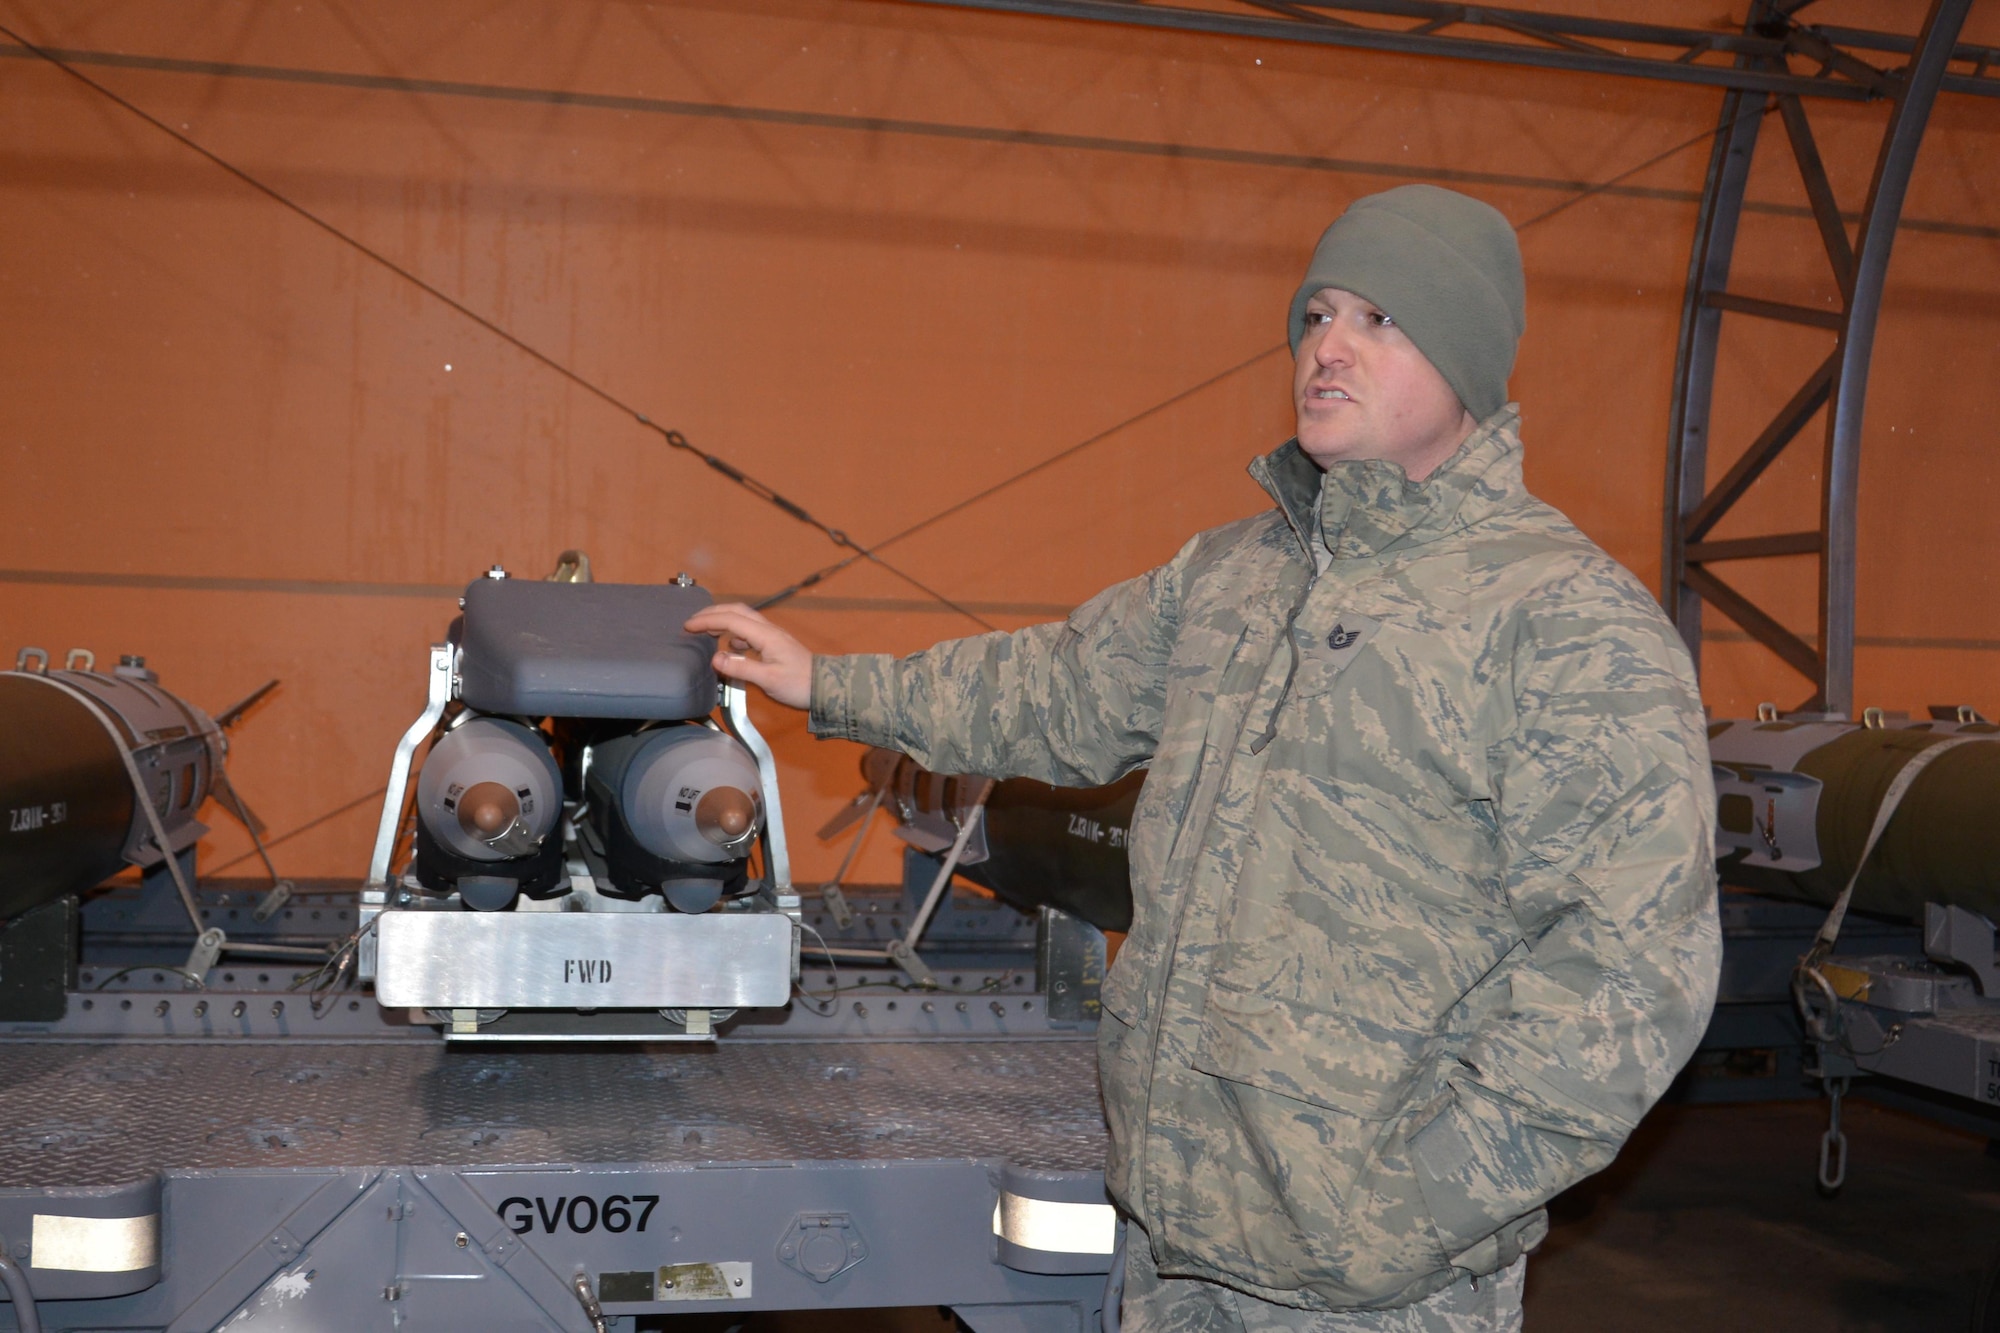 Members of the 477th Fighter Group showcase equipment and capabilities from the 3rd Munitions Flight November 6, 2016. Munitions Systems specialists are Airmen tasked with handling, storing, transporting, arming and disarming non-nuclear weapons systems. The Munitions Systems career field is commonly referred to as "ammo." (Photo by Maj. Barbara Jensen, Released)